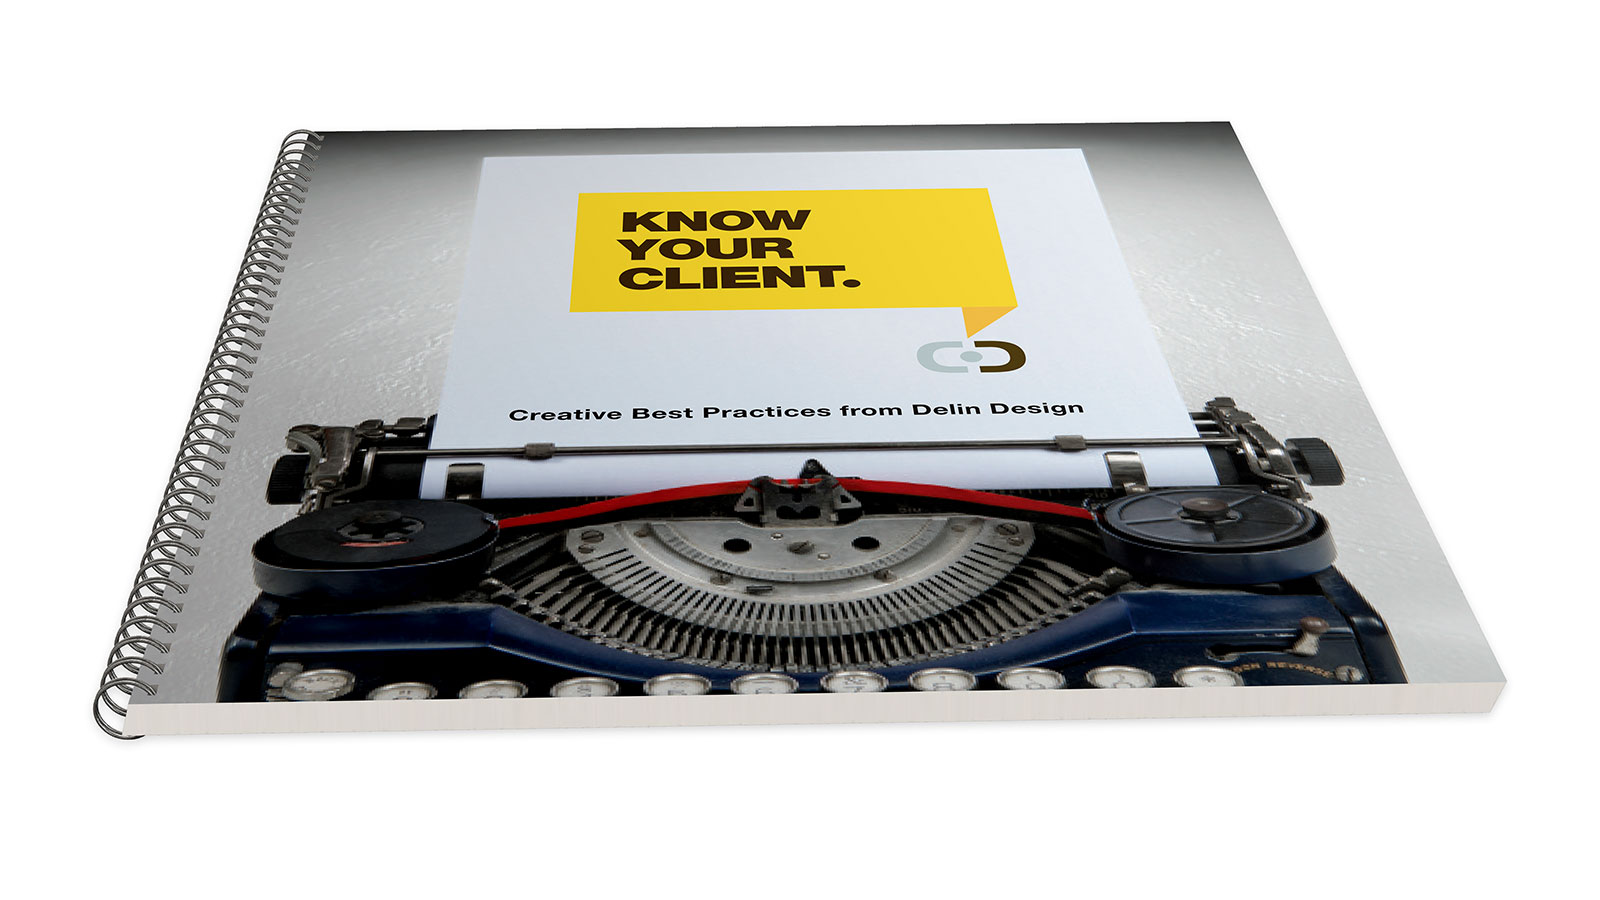 Delin Design "Know Your Client" Promotional Book Cover